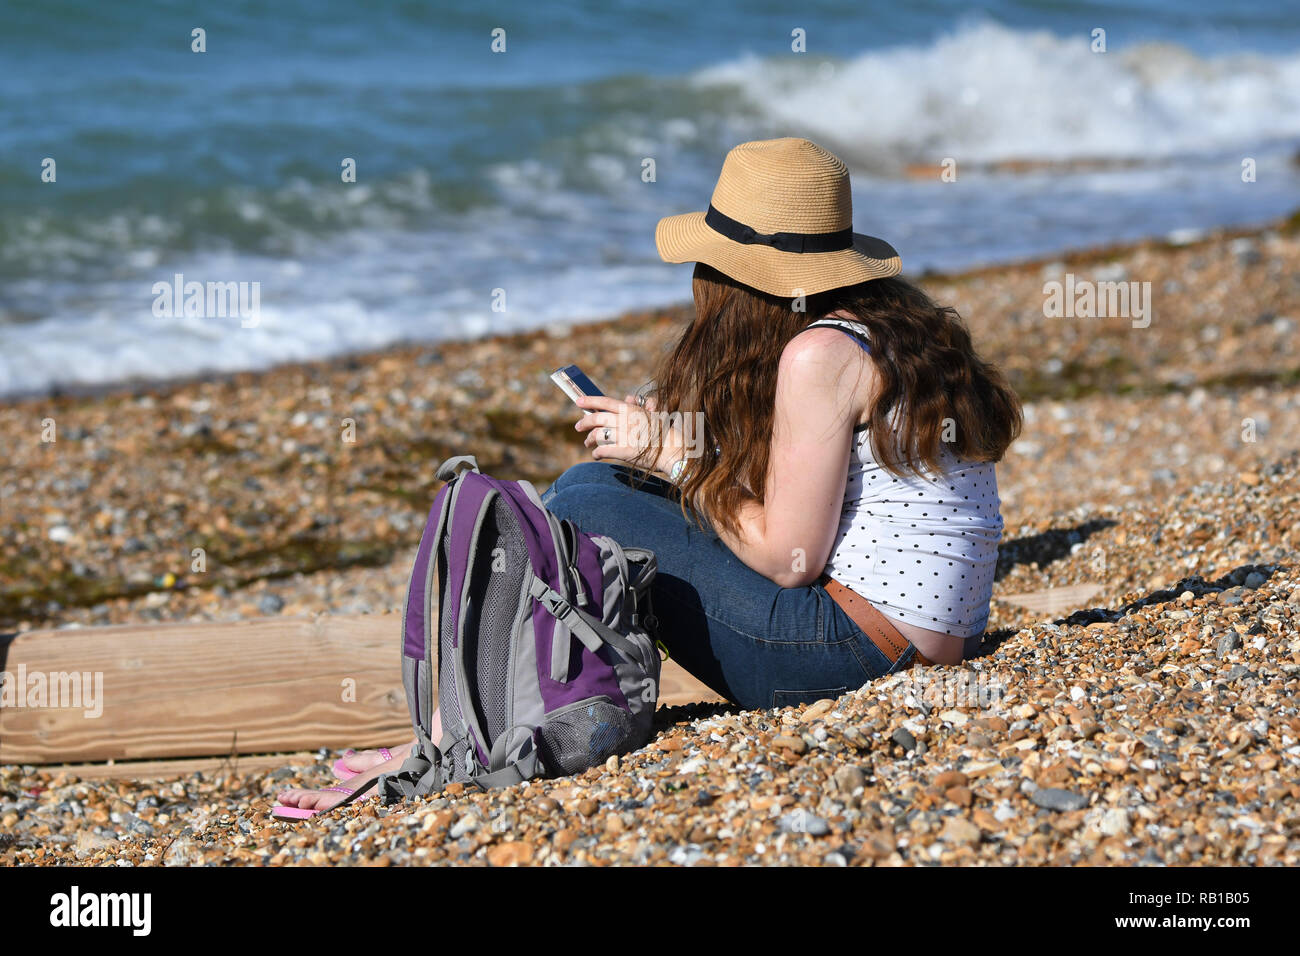 Young woman wearing sun hat sitting on a beach using a smartphone on a hot day in Summer in the UK. Stock Photo